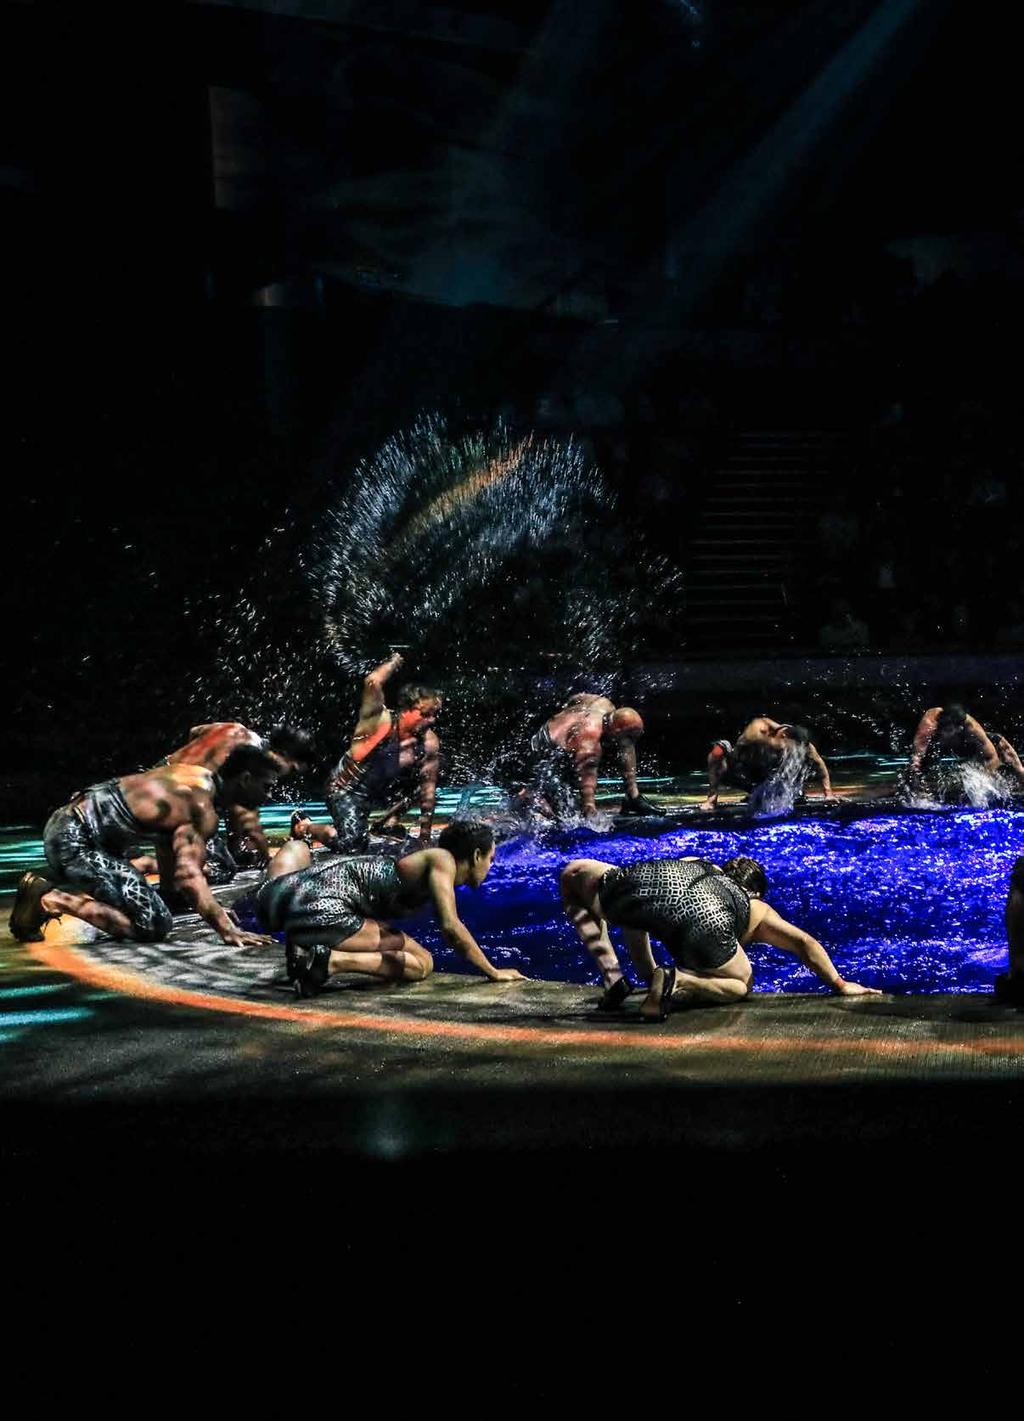 WORLD-CLASS ENTERTAINMENT Brought to Dubai by the Al Habtoor Group, La Perle by Dragone is the region s first permanent show, boasting 450 performances per year in a tailor-made state-of-the-art